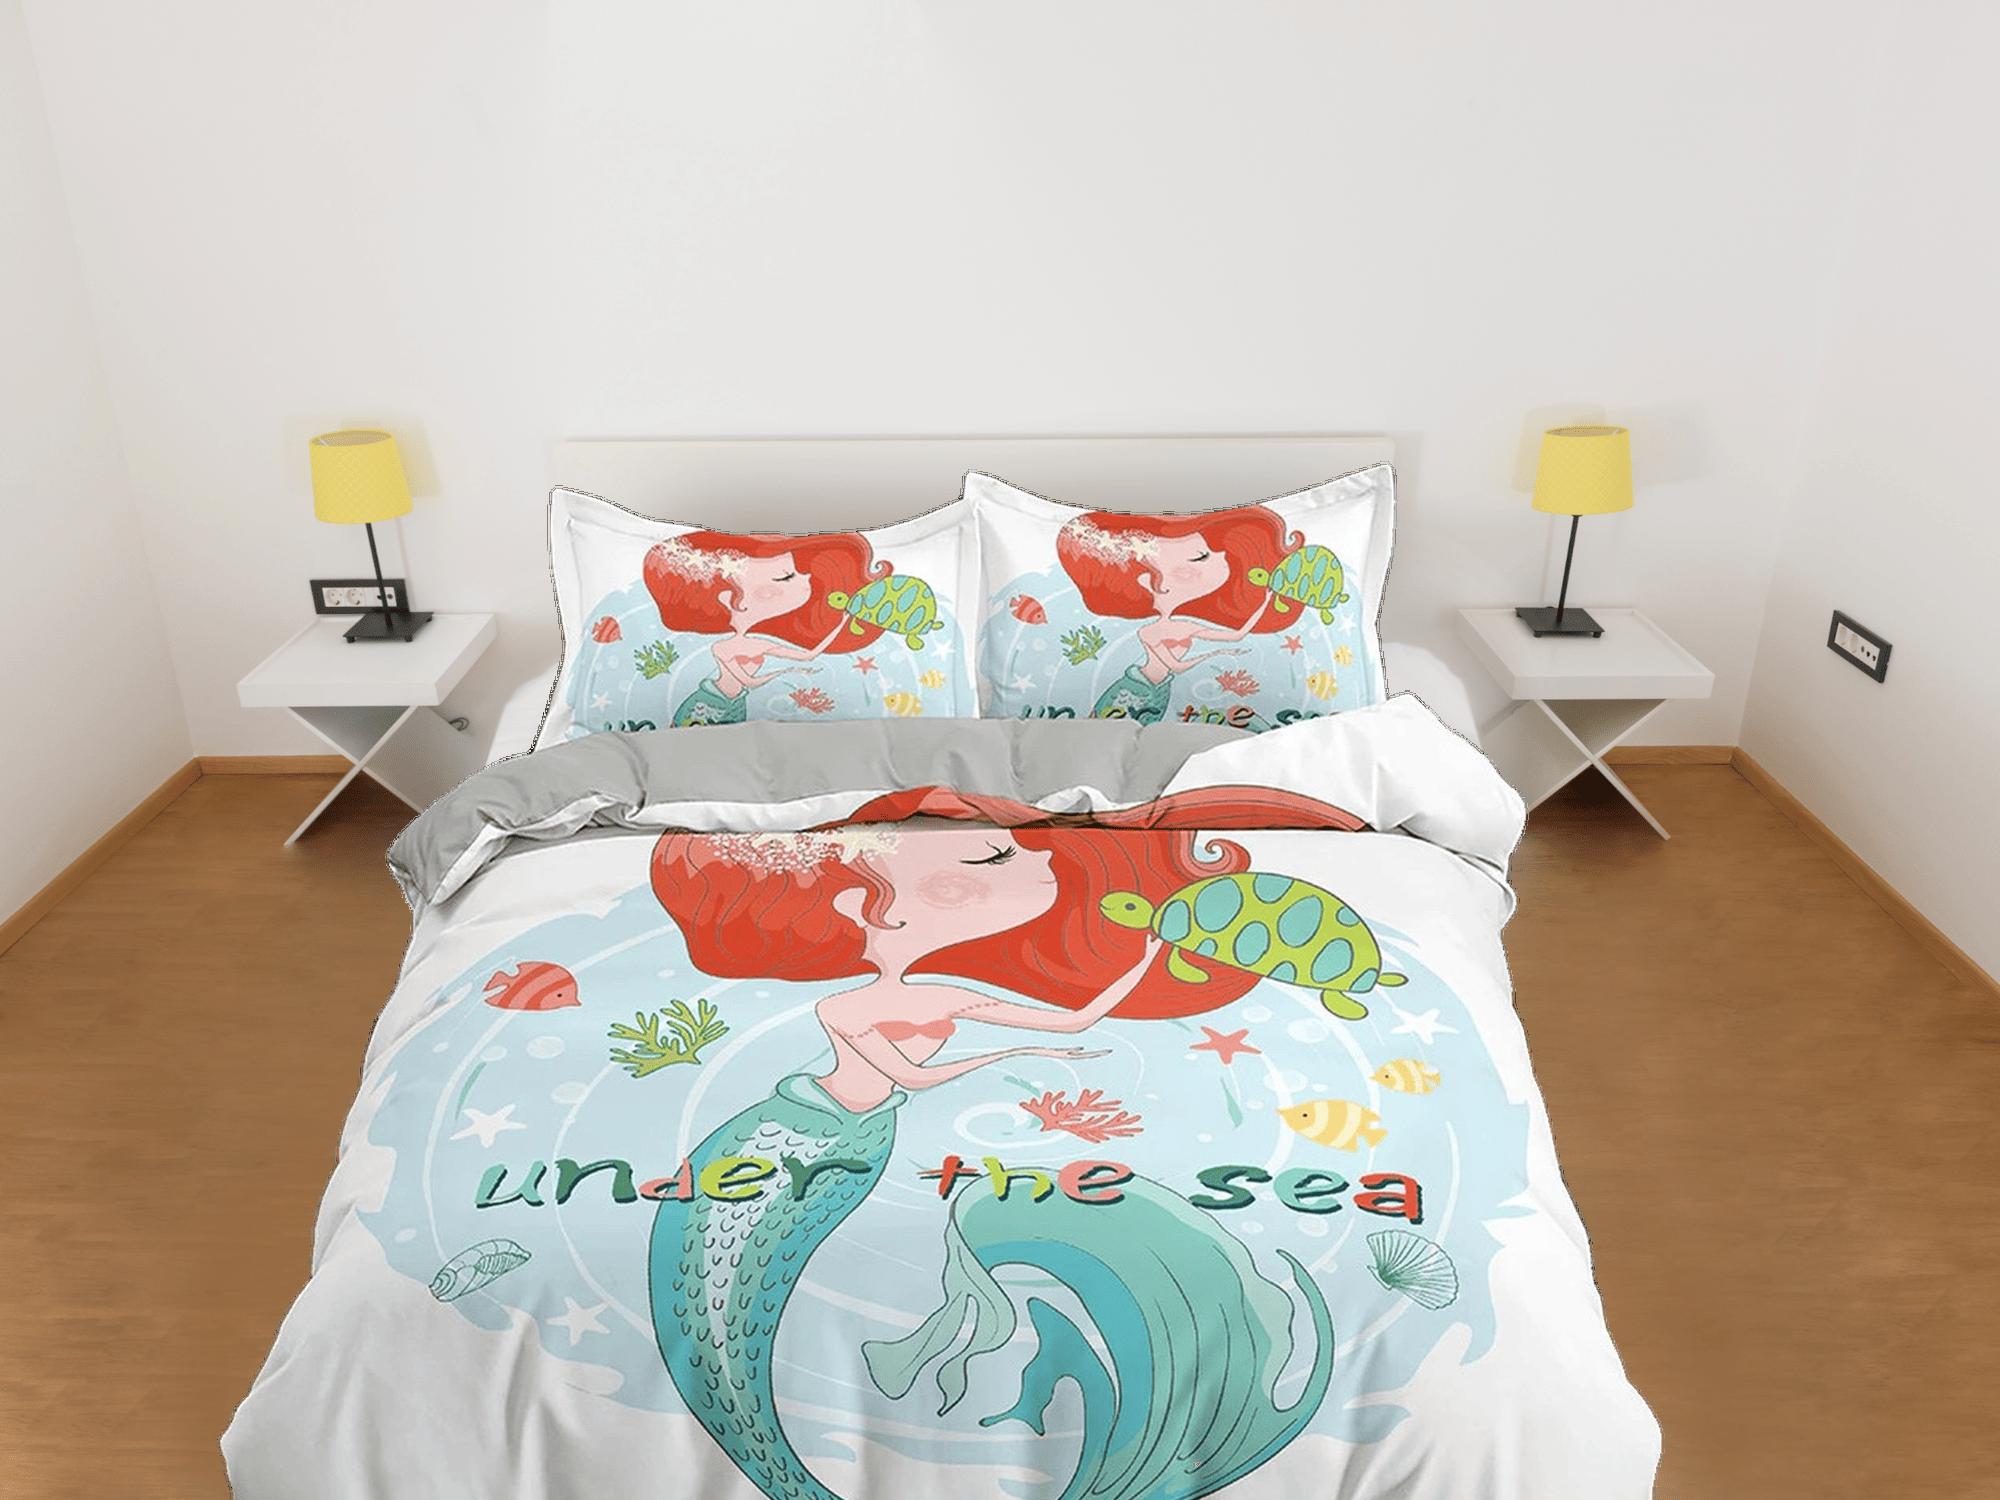 daintyduvet Little mermaid and turtle friend fairytale toddler bedding, unique duvet cover kids, crib bedding, baby zipper bedding, king queen full twin